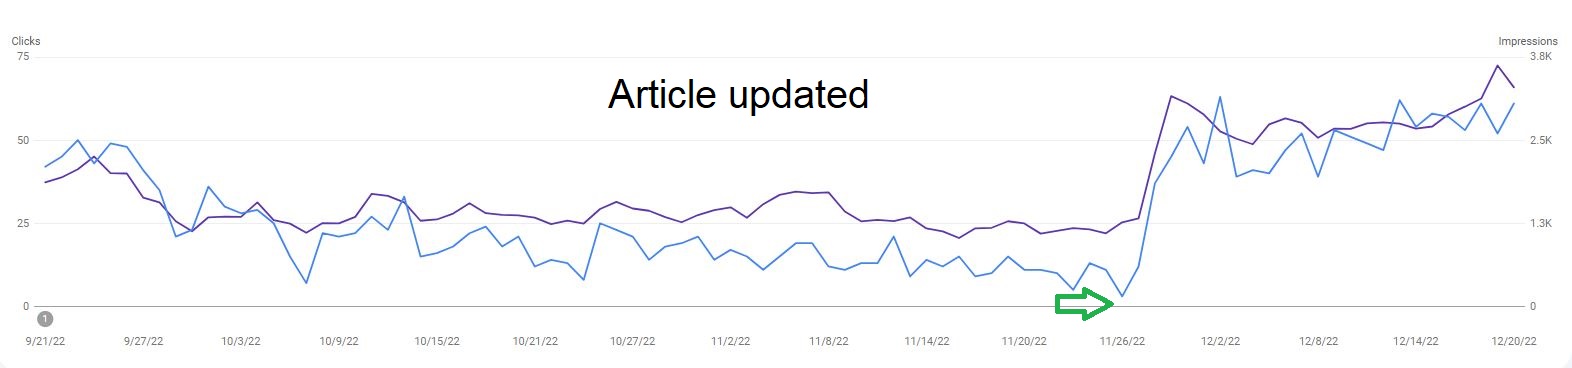 Content update effect on Google rankings and organic traffic